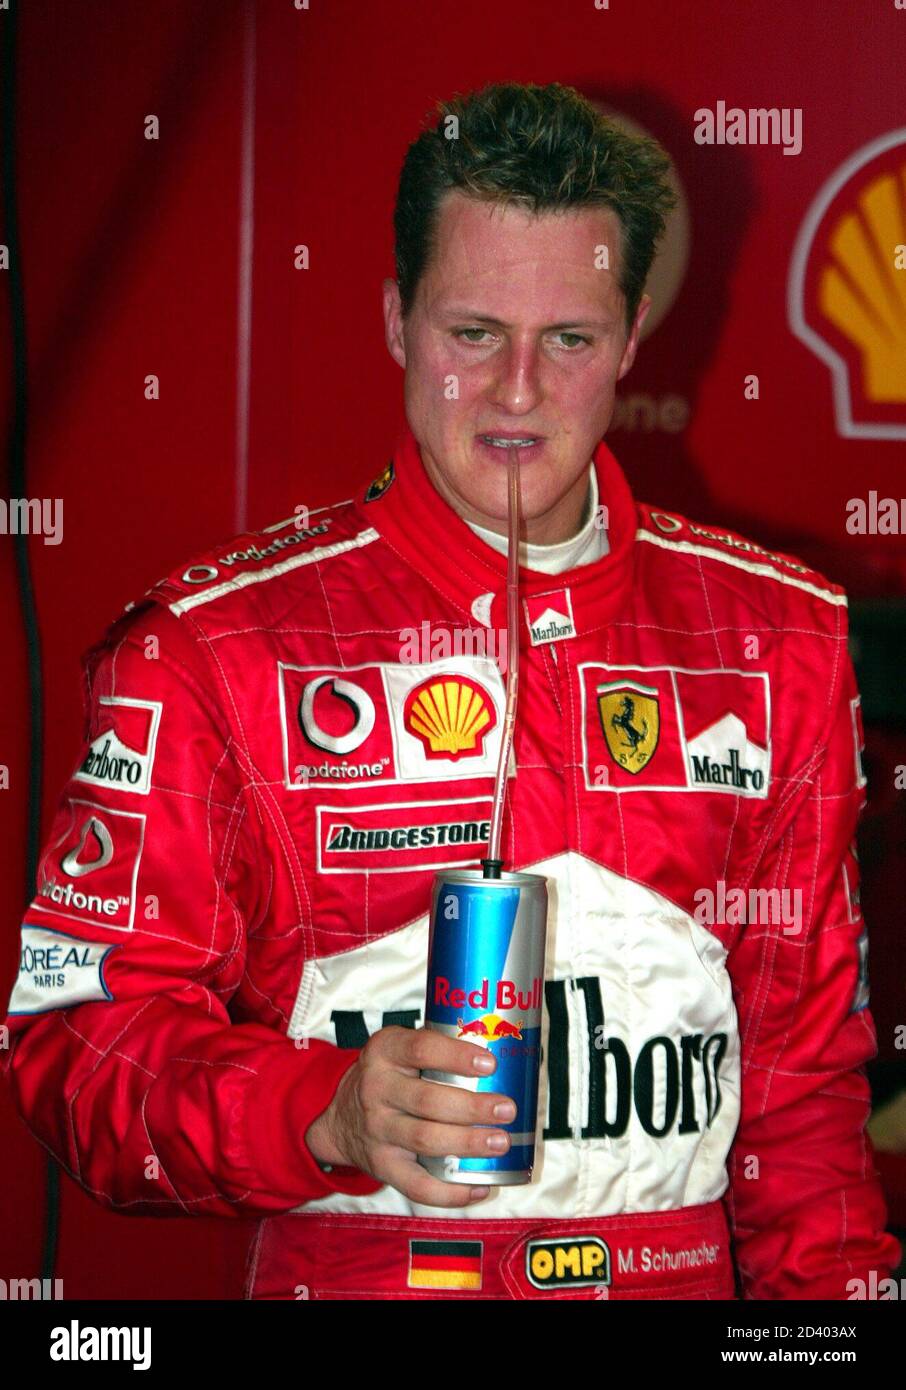 Michael Schumacher of Germany drinks in the Ferrari pit during the free  practice session for the upcoming Formula One Grand Prix of Monaco in  Monaco May 29, 2003. The Monaco Grand Prix